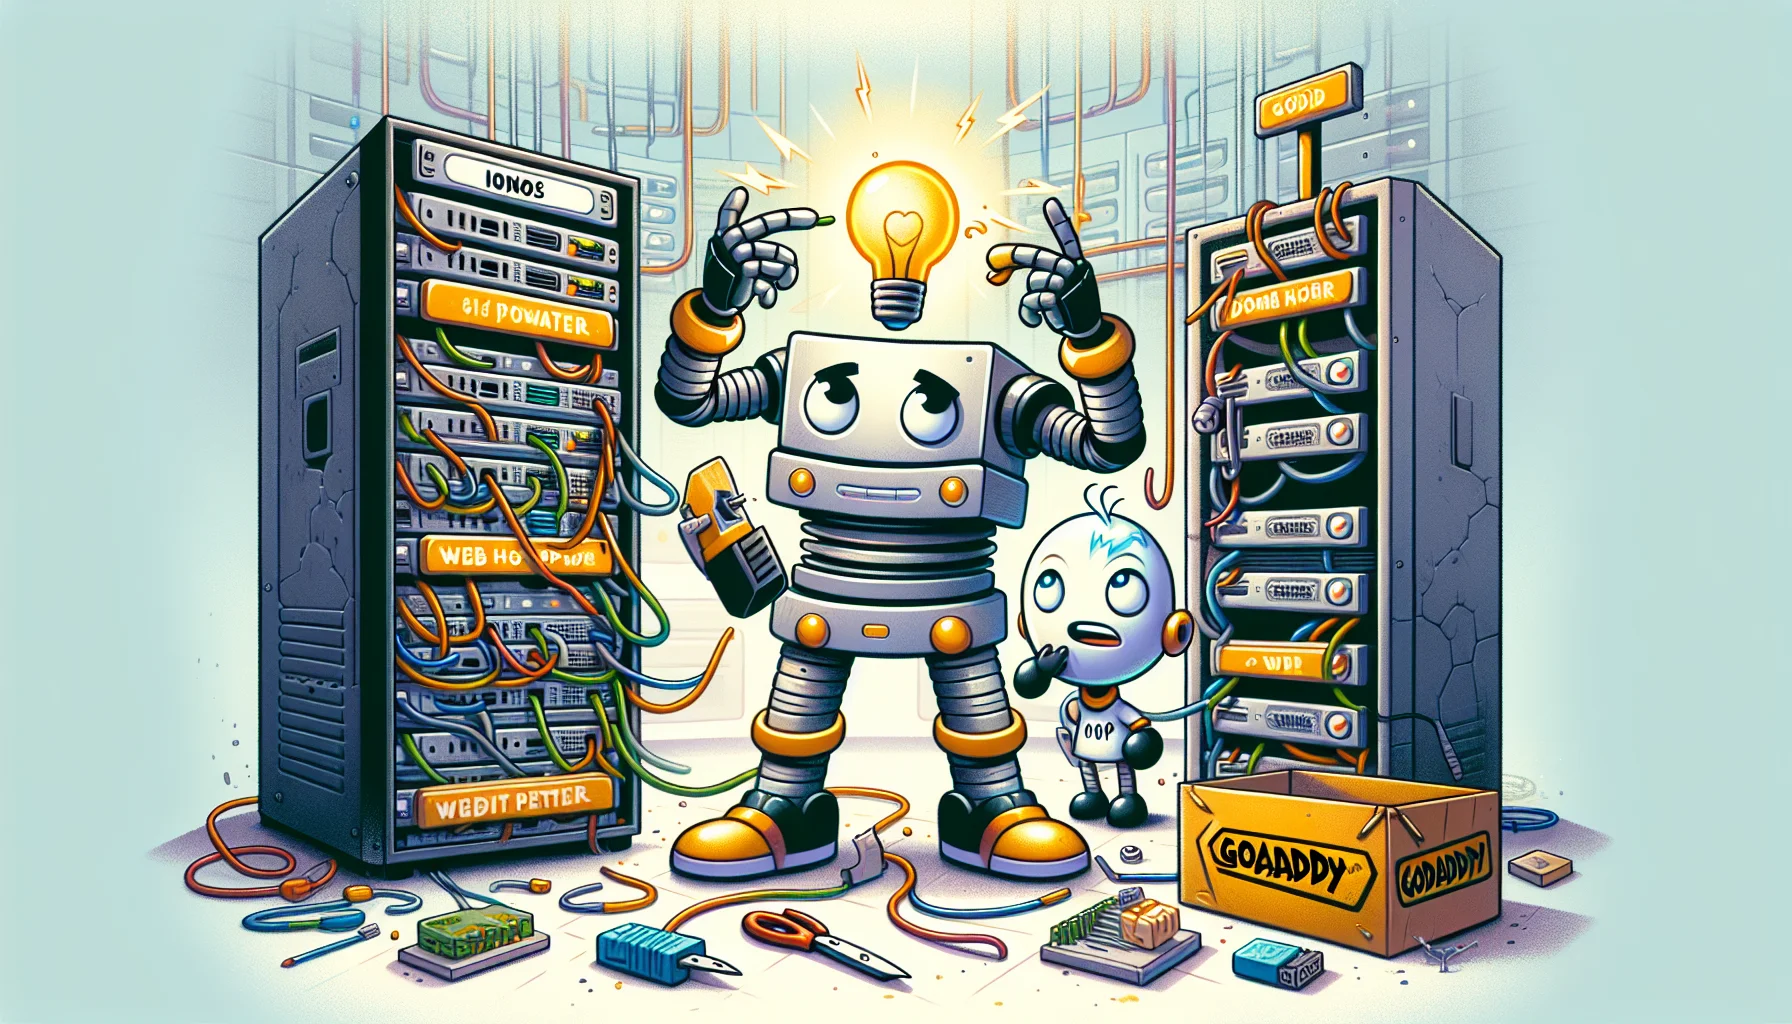 Create a comical, illustrative scenario featuring two anthropomorphized server racks. One is labeled 'Ionos' - a well-built robotic character with a confident expression holding a glowing orb symbolizing 'web power'. The other is labeled 'GoDaddy' - a quirky-looking machine, struggling with a tangled web of connections. Add some symbolic elements related to web hosting like domain names or HTTP requests depicted as physical tools around them. The background should feature an array of complex server infrastructure to hint at the challenging world of web hosting.